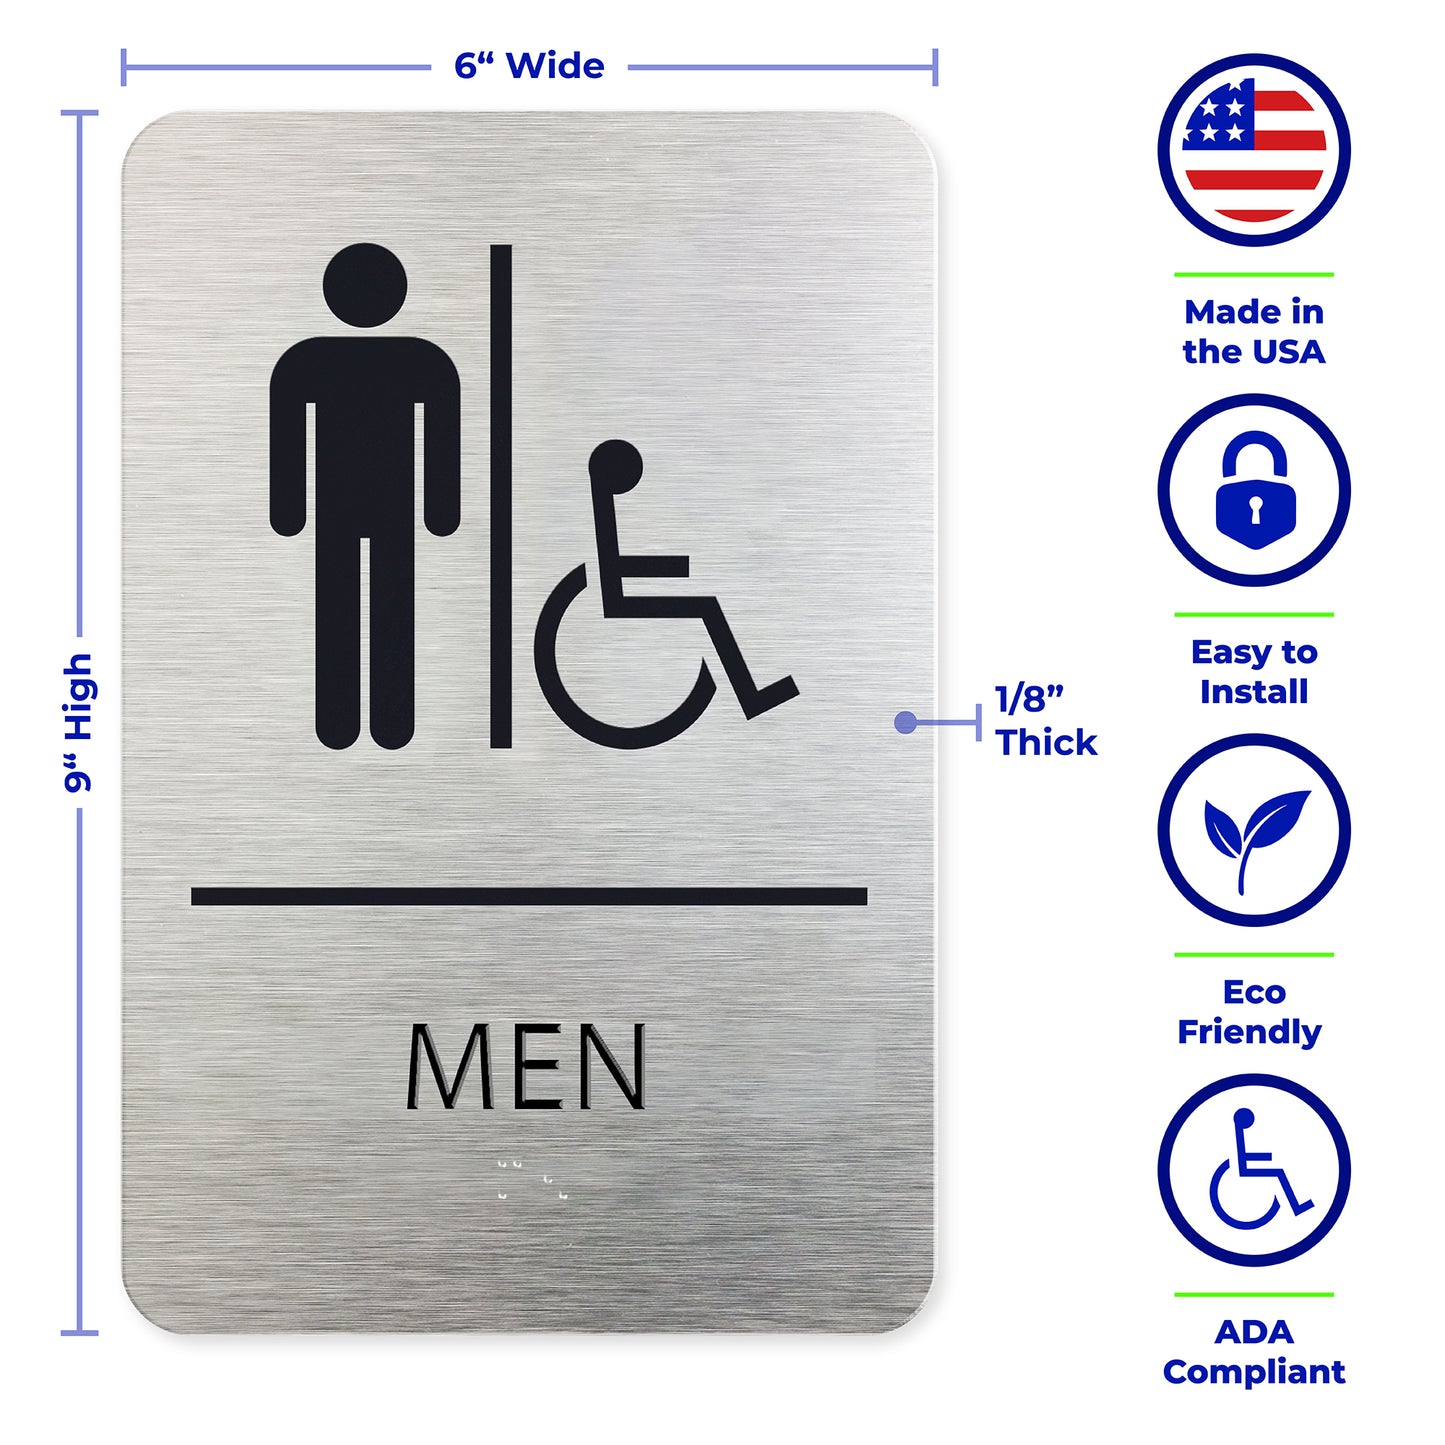 MEN Restroom Signs with Man & Wheelchair Symbols, ADA CompliantBrushed Silver, Black Raised Text, Grade II Braille, 6"x9"